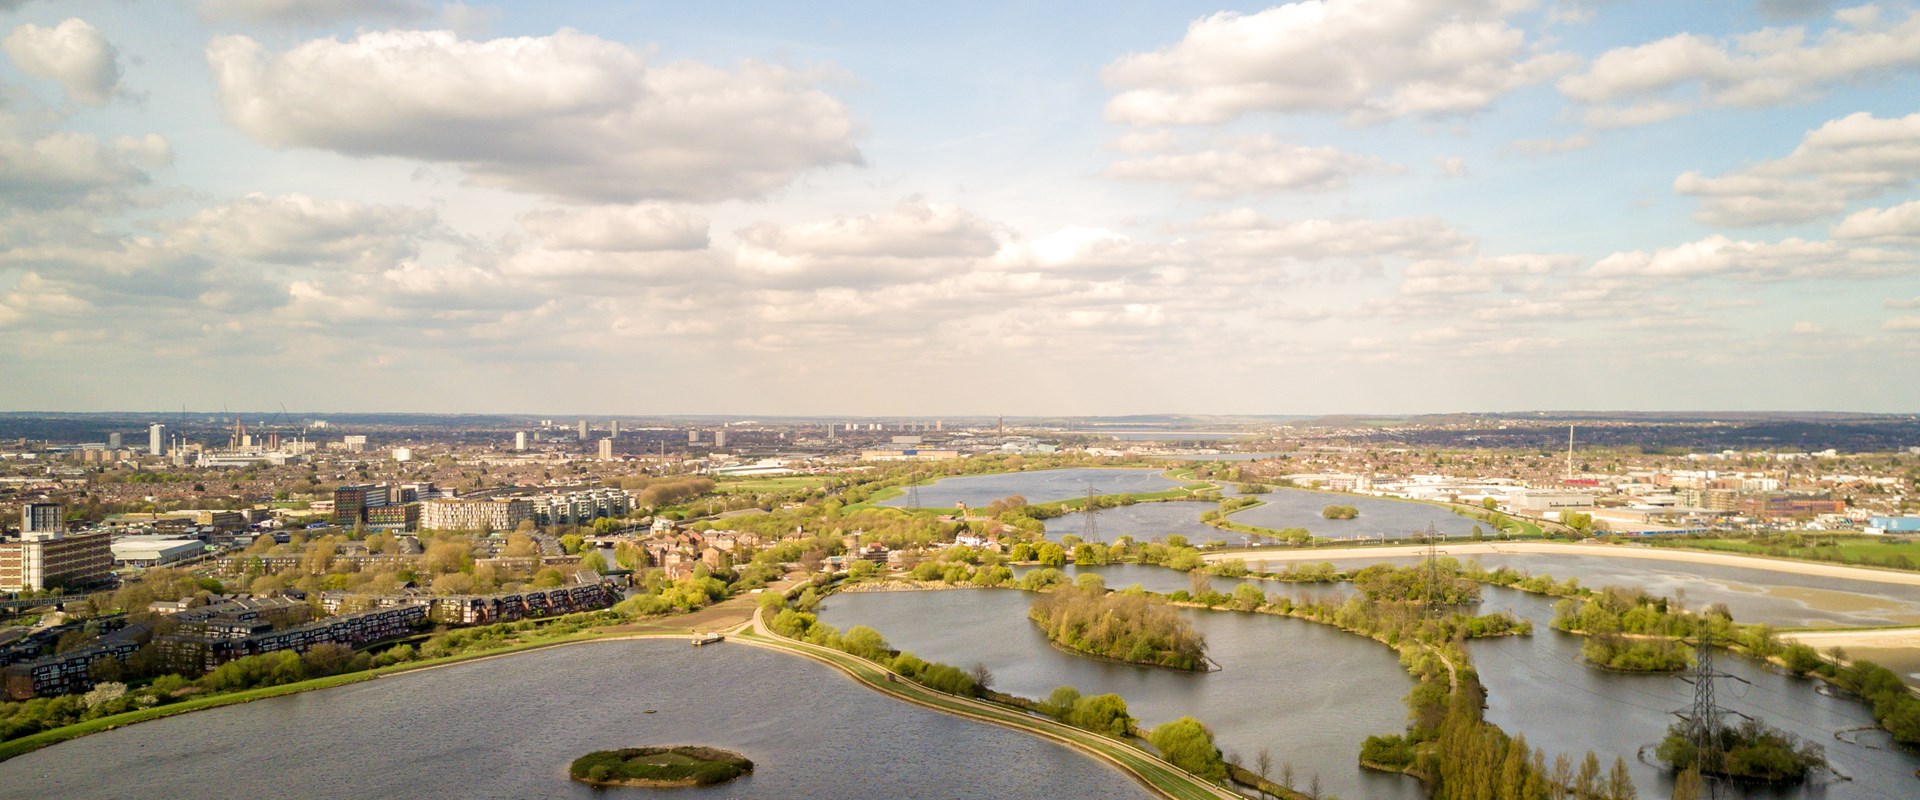 An aerial image of Waltham Forest lakes in London